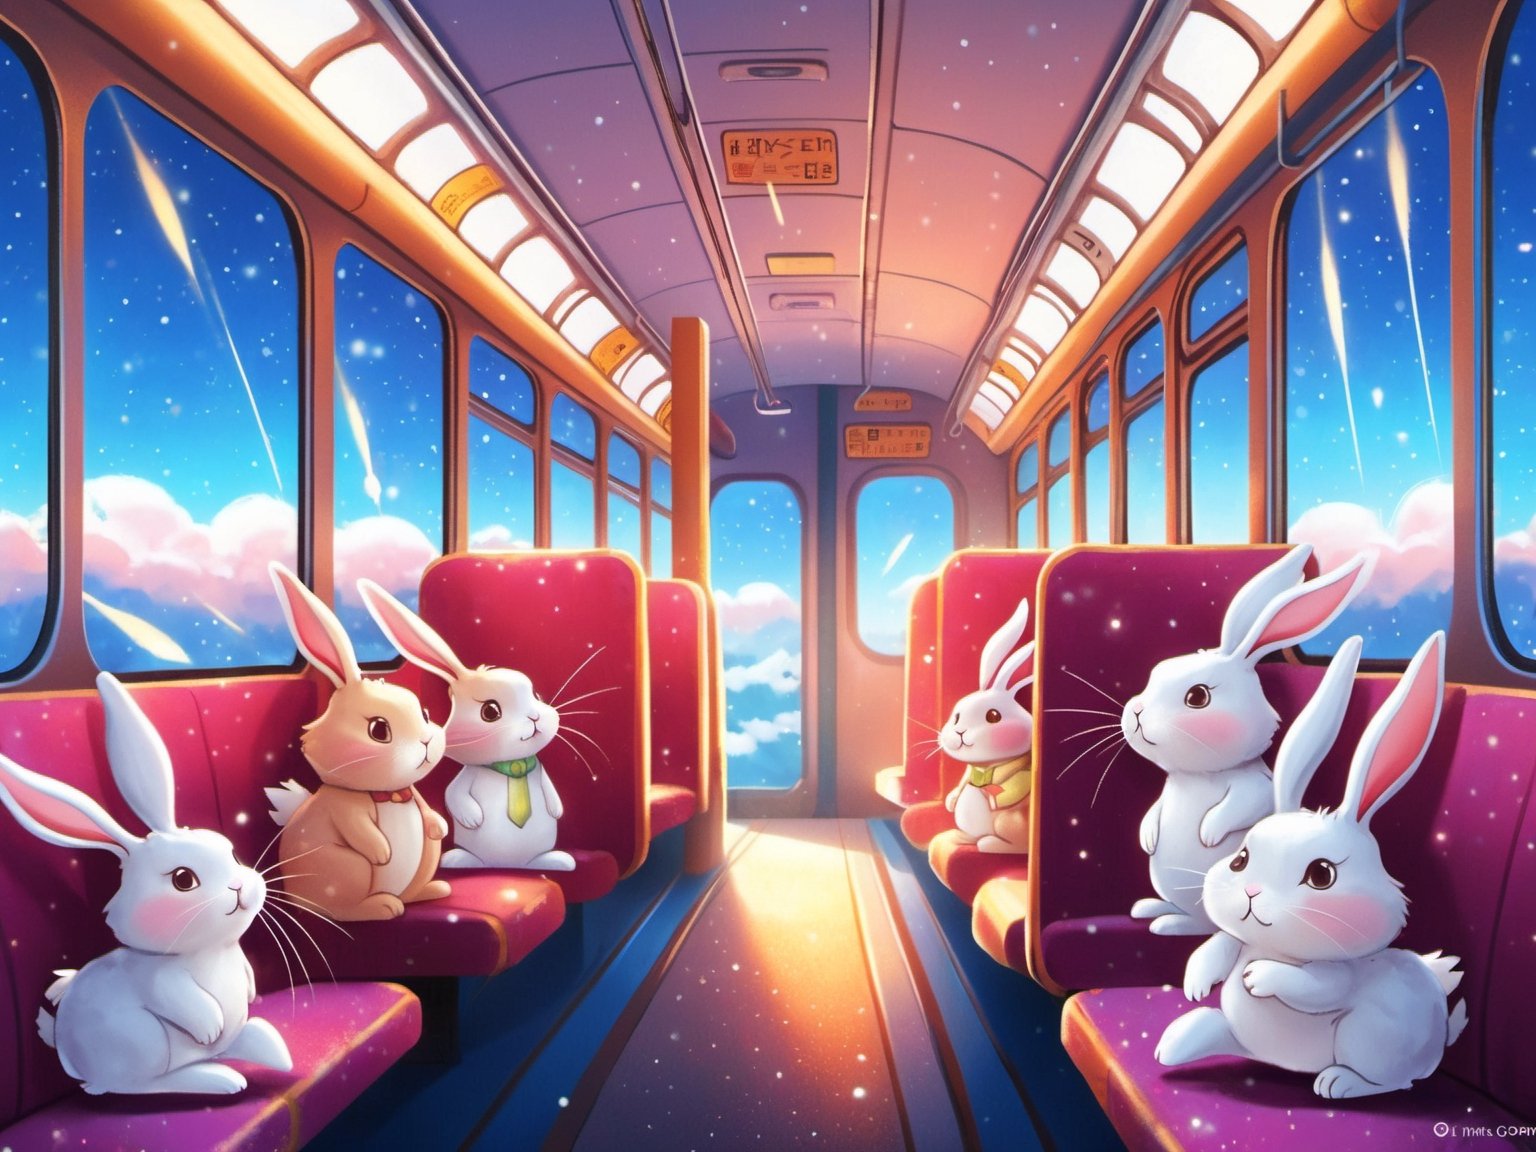 (Epic:1.4),  (A lot of rabbits:1.6),  Being on the train)),  traveling a long distance from the city,  waving goodbye,  saying goodbye,  hugging each other,  Many rabbits appeared from the train window. Waving a handkerchief,  Hands wipe away tears,  Smile with tears,  The atmosphere is full of emotions. (Meteor shower:1.4),  semi realistic hyper detailed,  awesome quality,  ultra-high res,  (photorealistic:1.4),  Masterpiece,  Concept Art,  perfect animal,  colorful wear,  bright light reflecting,  intricate details,  sharp focus,  natural lighting,  perfect shadow,  realistic,  16K,  UHD,  artstation,  pixiv,  CGI art,  extremely detailed cg,  quality,  gorgeous light and shadow,  highres,  (absurdres:1.2),  ultra high res,  high quality,  sparkling eyes,  stunning light,  gorgeous scenes,  ultra detailed,  brilliant color,  Illustrate,  starry sky Shining brightly It was a night so beautiful it was awe-inspiring,  celebrating,  in a wintery scene pink purple blue green northern lights,  trending on artstation,  kawaii,  sharp focus,  Photorealistic Images,  (extra wide shot:1.4),  dynamic lighting,  vivid colors,  texture detail,  particle effects,  storytelling elements,  narrative flair,  hyper (anime illustration:1.4),  character,  dynamic angle,  no human,,